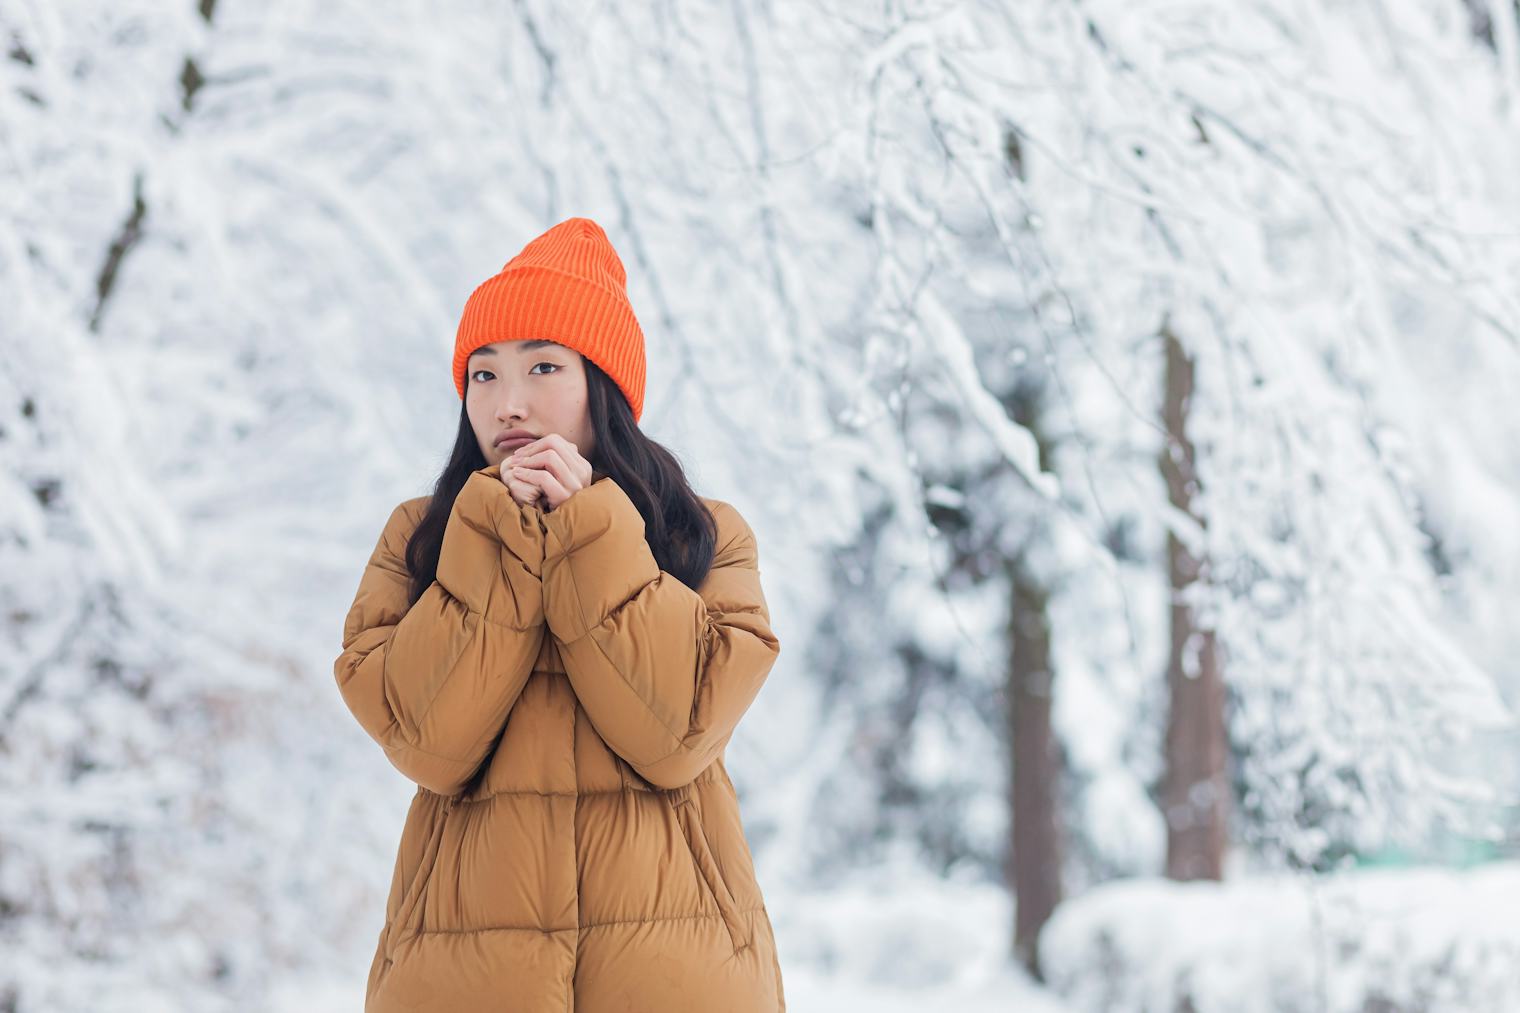 How To Stay Calm During The Holidays, According To Therapists